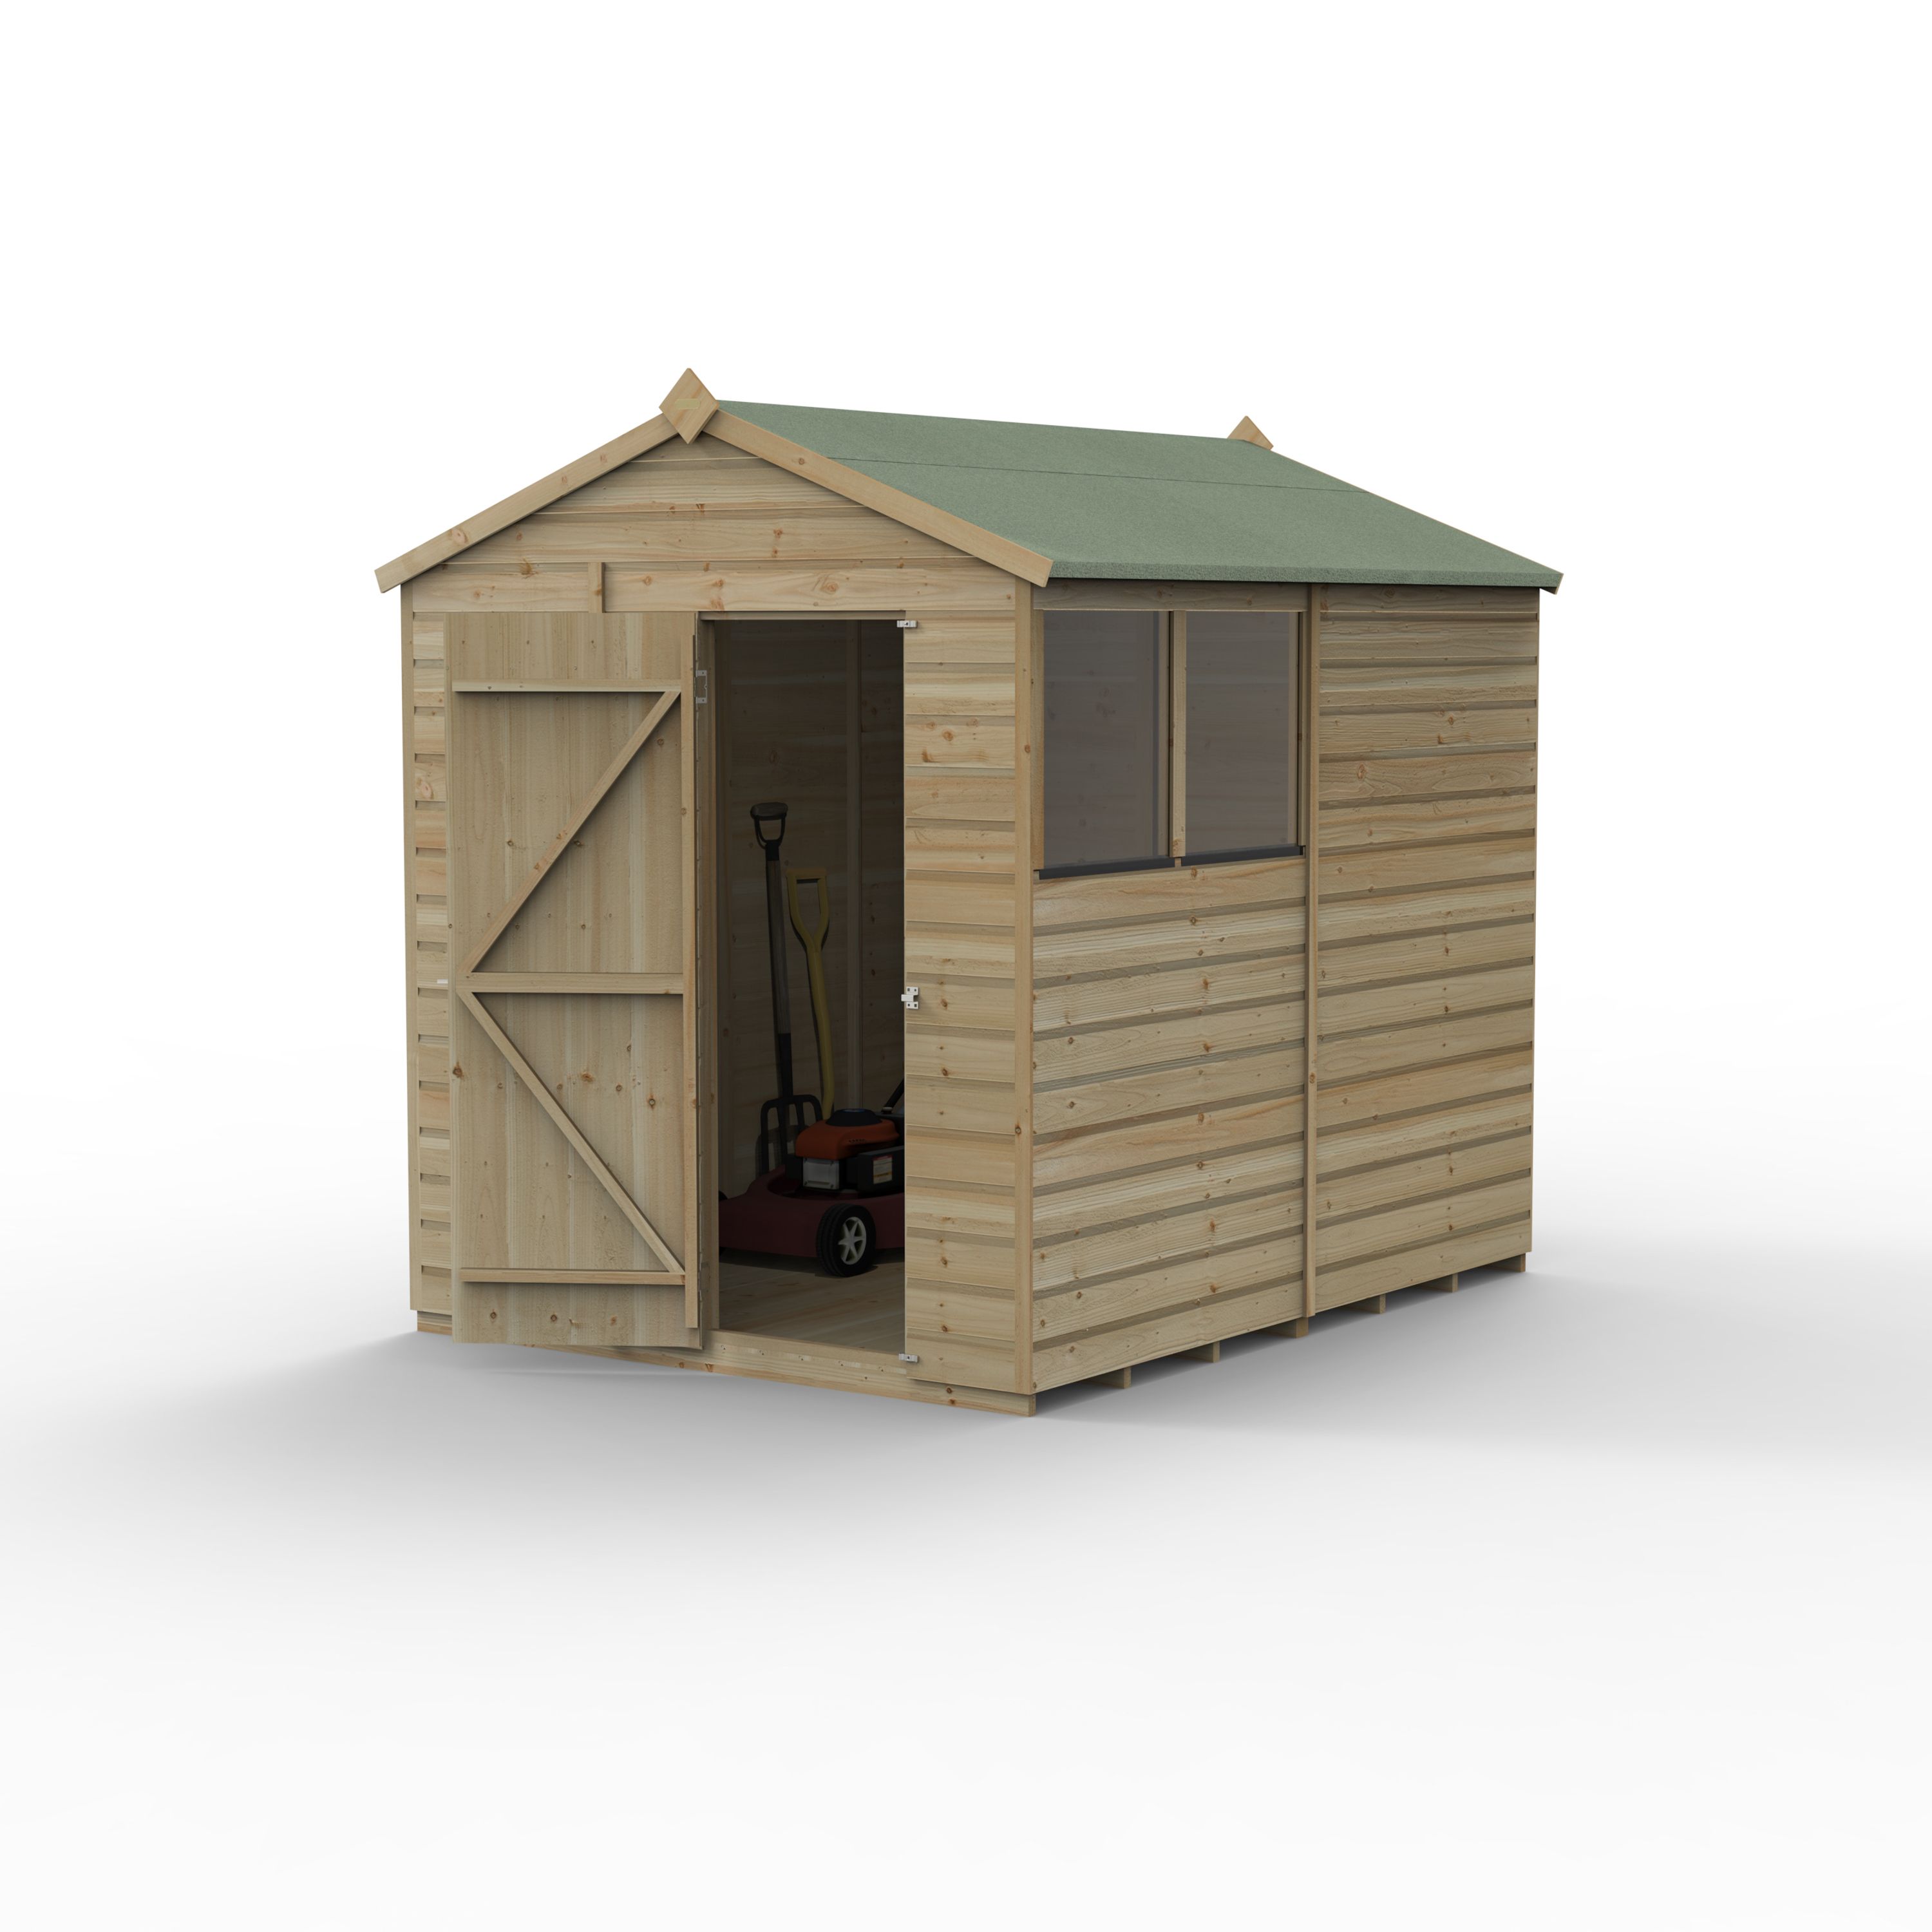 Forest Garden Beckwood 8x6 ft Apex Natural timber Wooden Shed with floor & 2 windows (Base included)